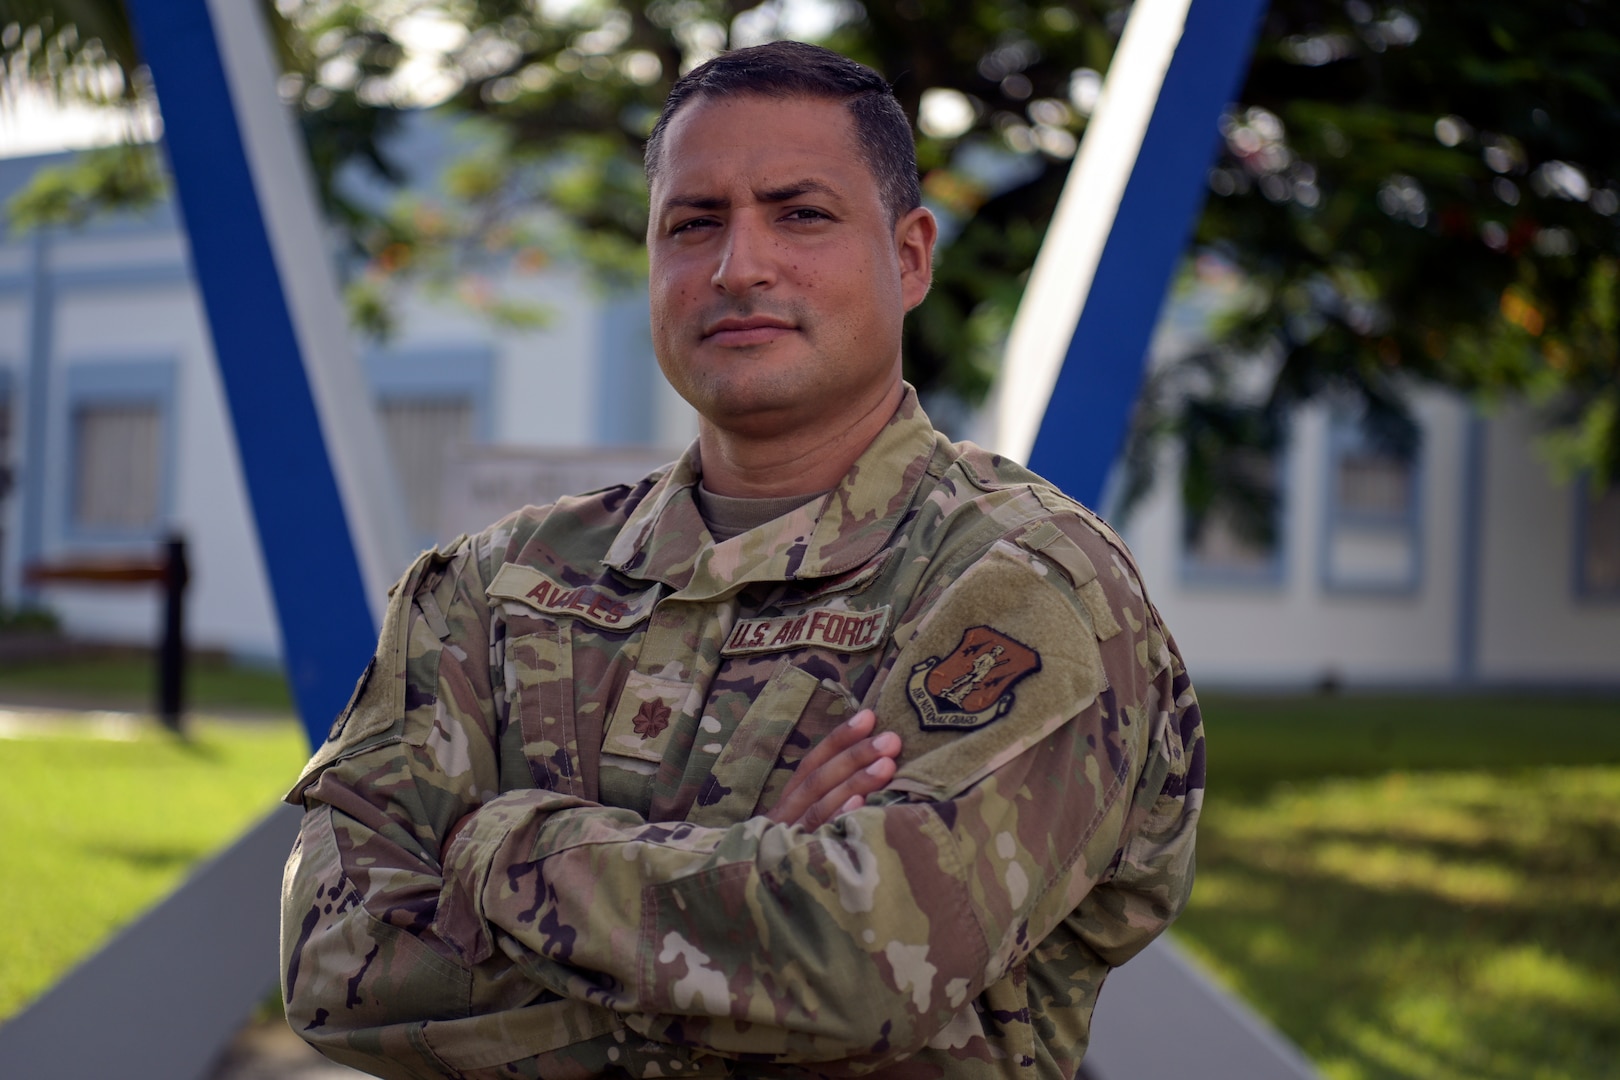 Puerto Rico Air National Guard Maj. Jesuan Aviles, the wing plans officer of the 156th Wing, stands in front of the Muñiz Memorial at Muñiz Air National Guard Base, Carolina, Puerto Rico, Sept. 16, 2022. Aviles was recognized for helping to save a cyclist's life by providing medical assistance until paramedics arrived.